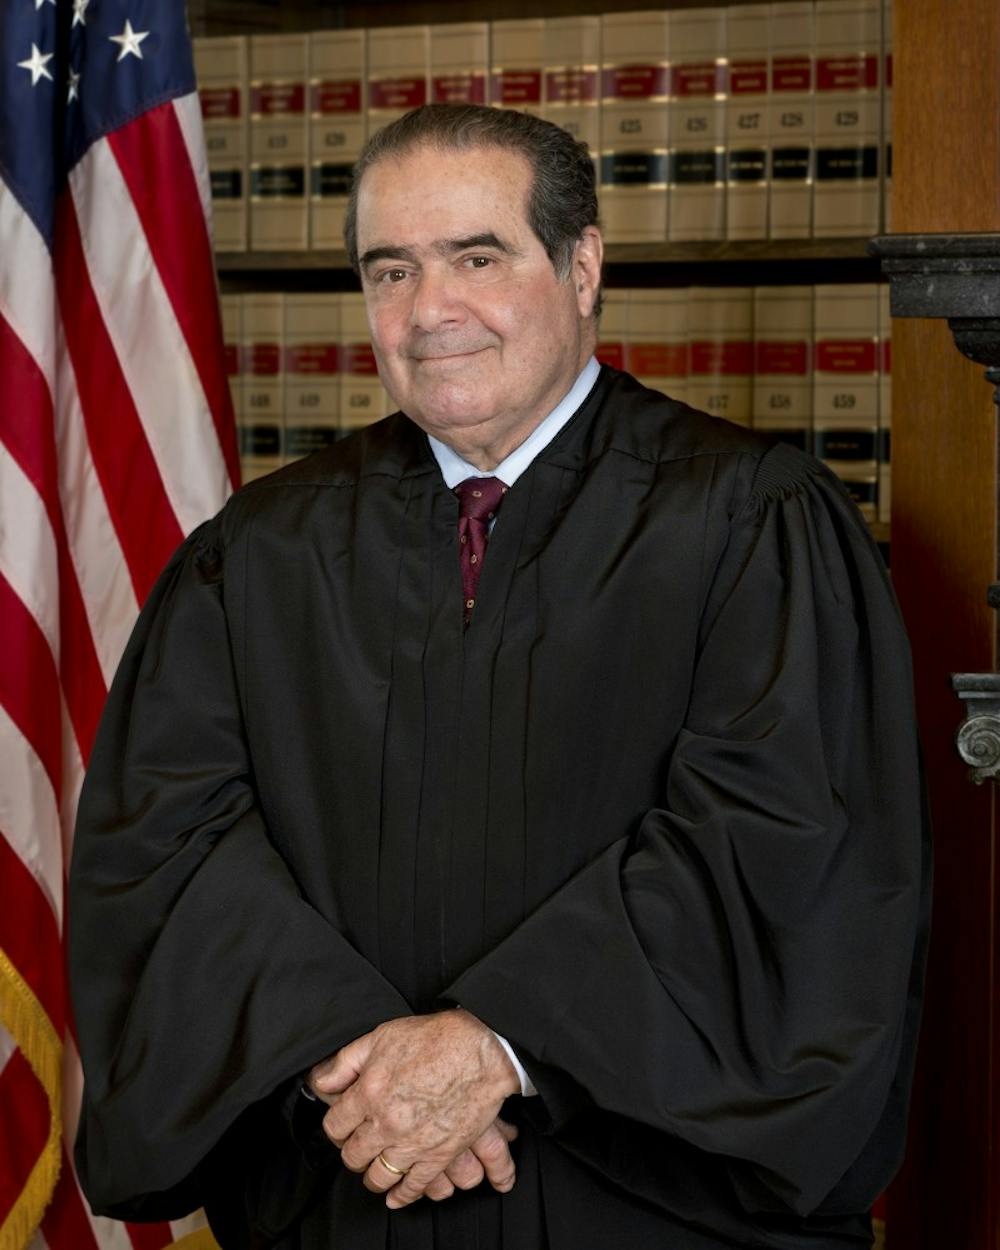 Justice Antonin Scalia was appointed to the Supreme Court under the Reagan administration. He first took his seat on Sept. 26, 1986.&nbsp;